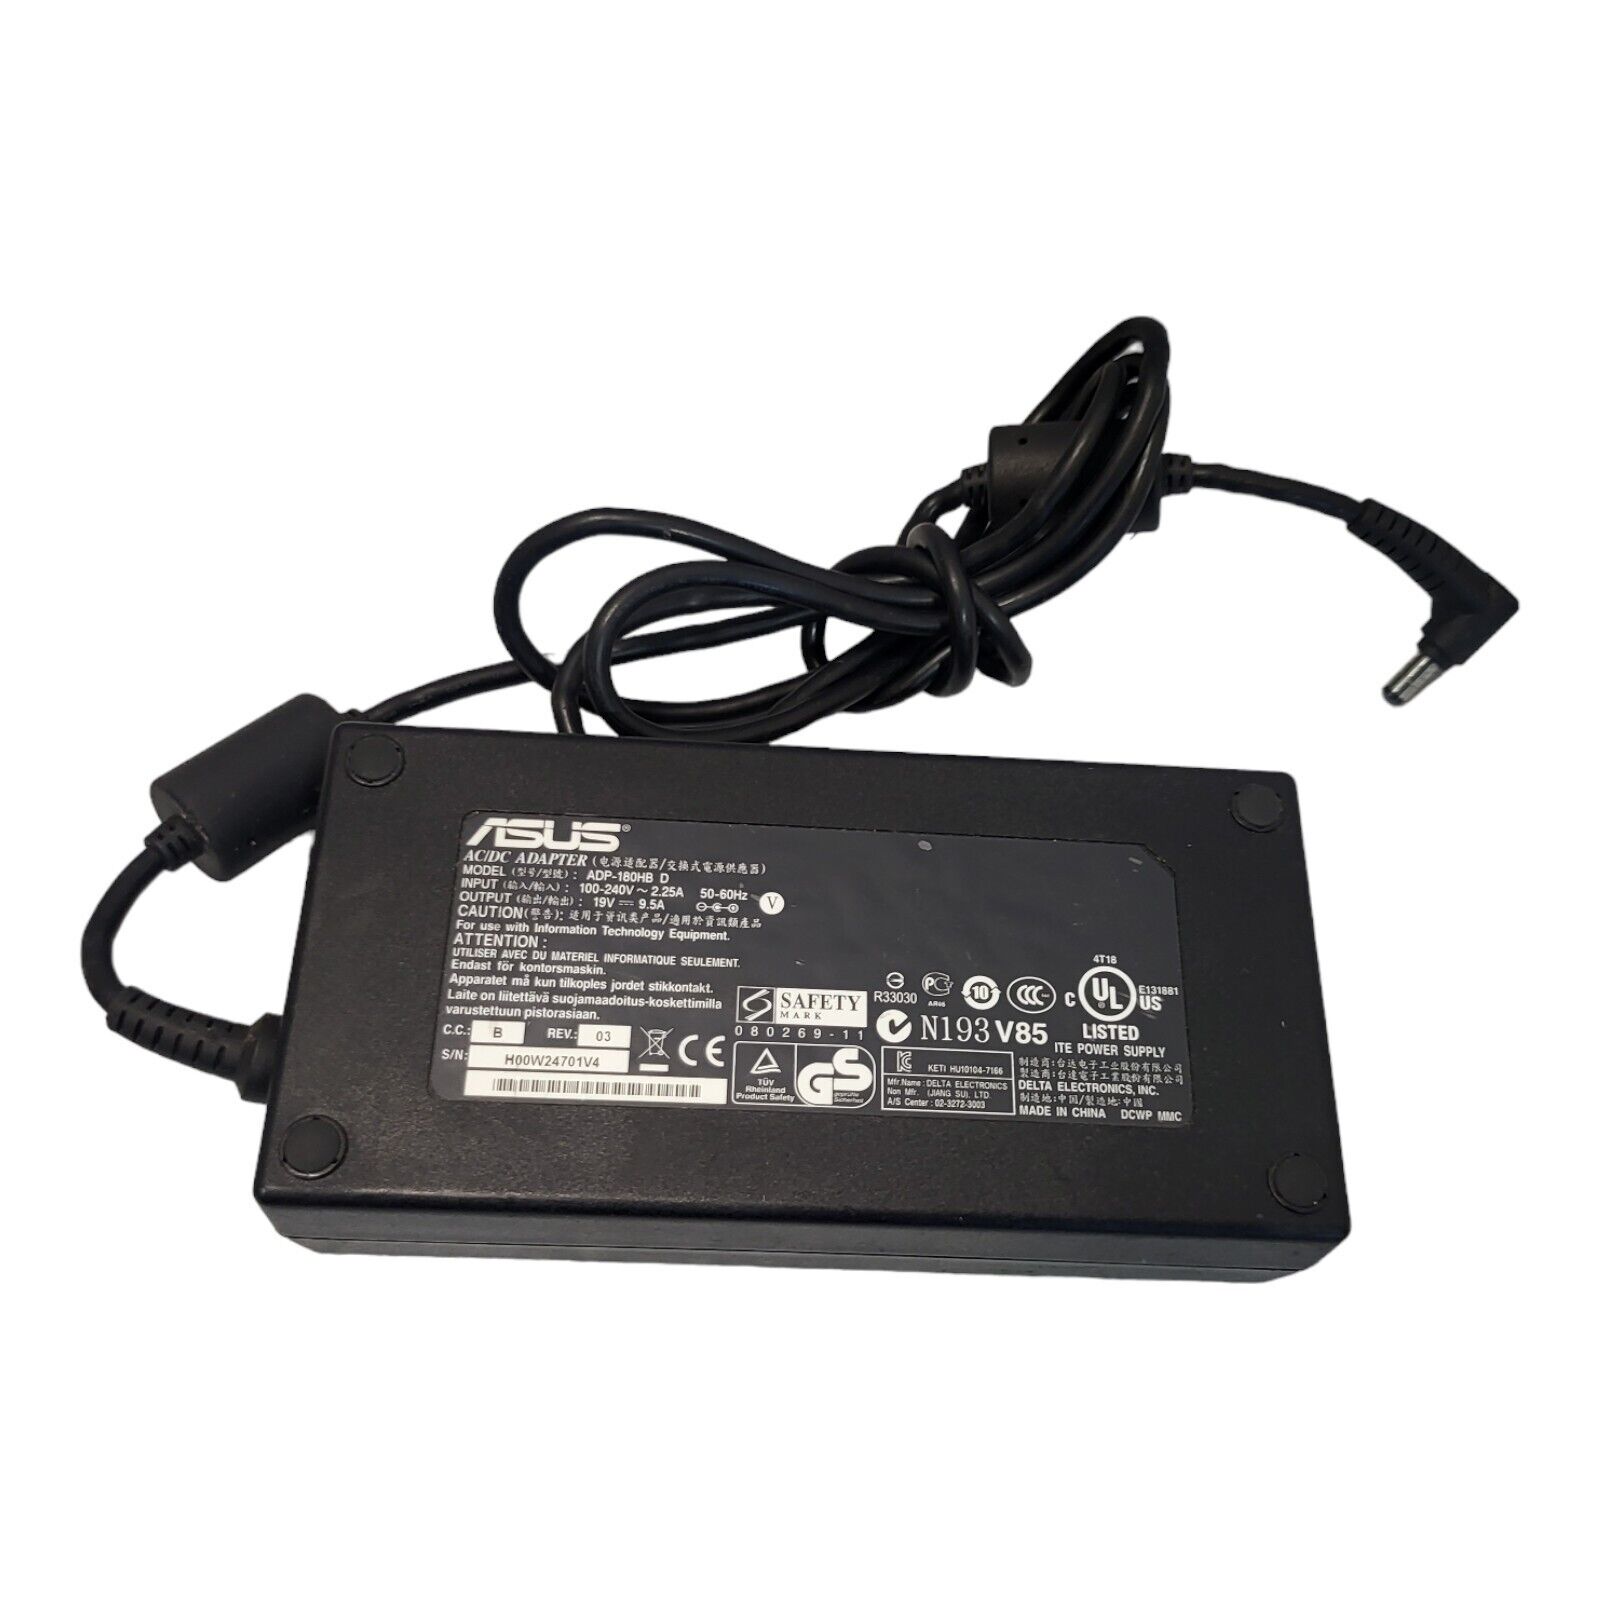 Original Genuine OEM ASUS ADP-180HB D 180W AC/DC Power Adapter Charger 19V 9.5A